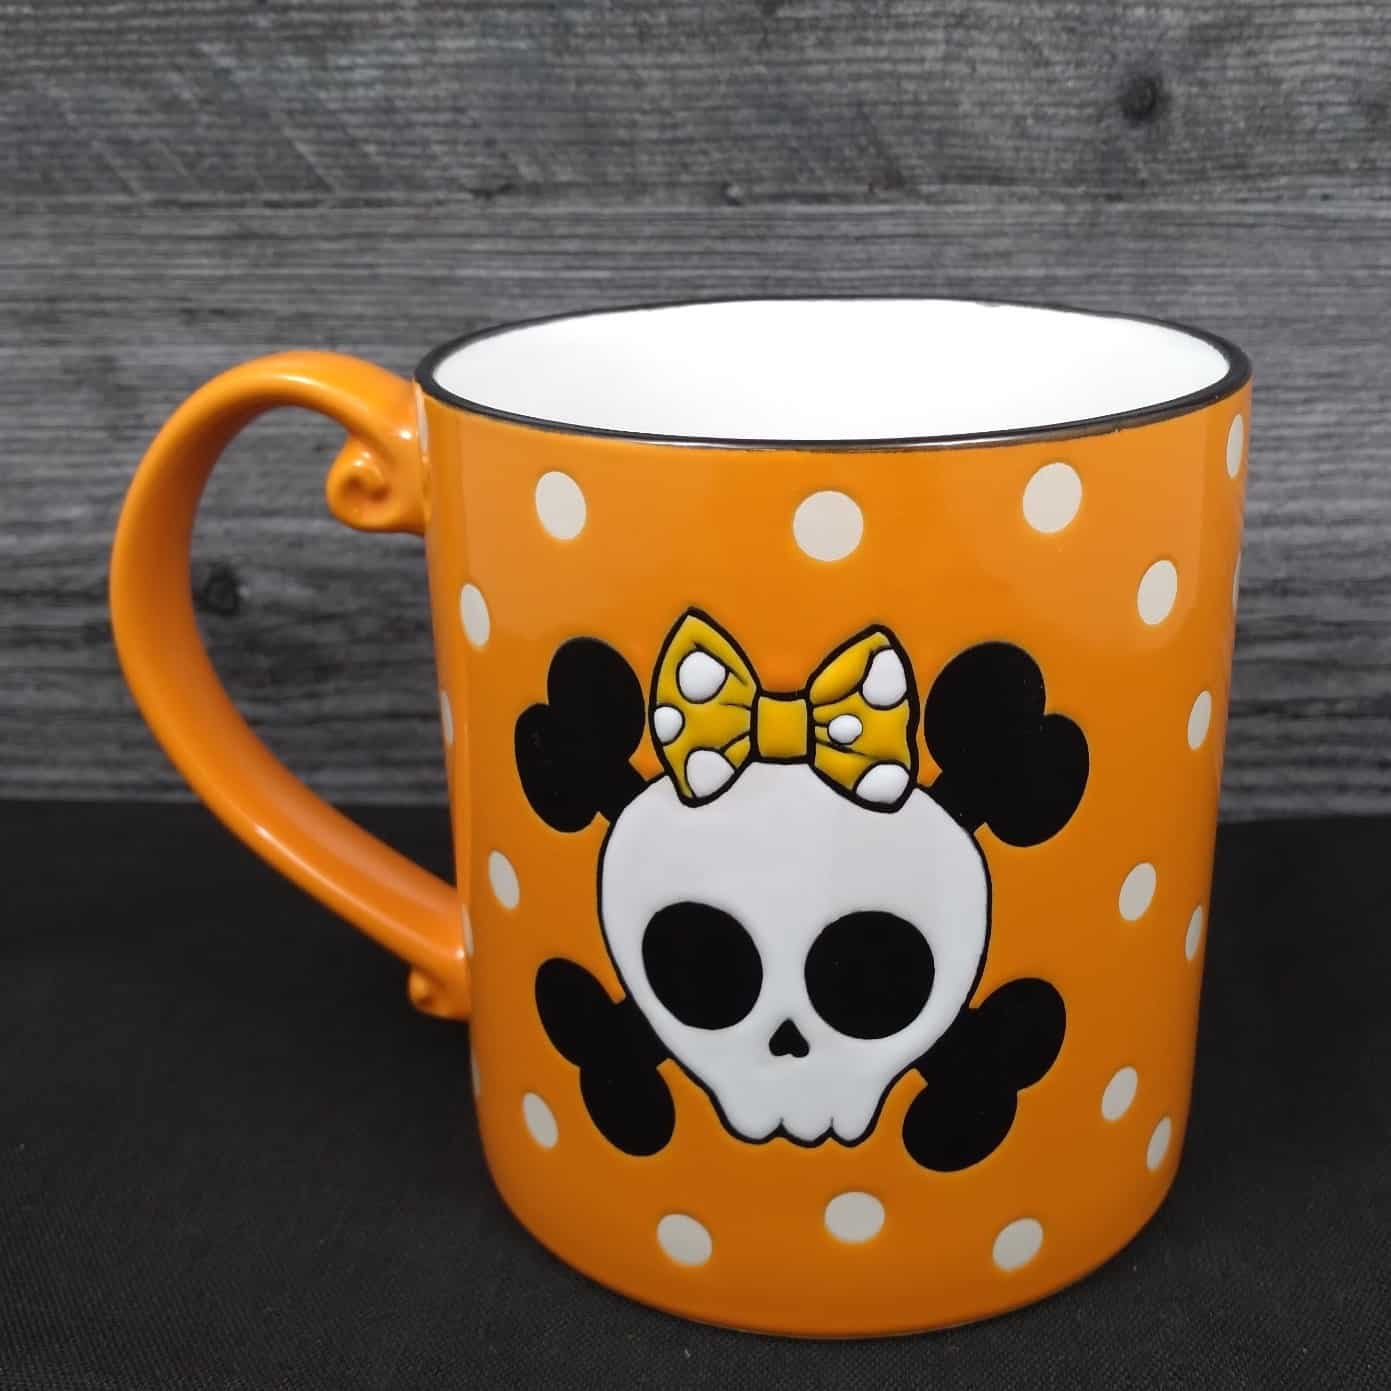 This Halloween Female Skull Coffee Mug Beverage Tea Cup 18oz 532ml by Blue Sky is made with love by Premier Homegoods! Shop more unique gift ideas today with Spots Initiatives, the best way to support creators.